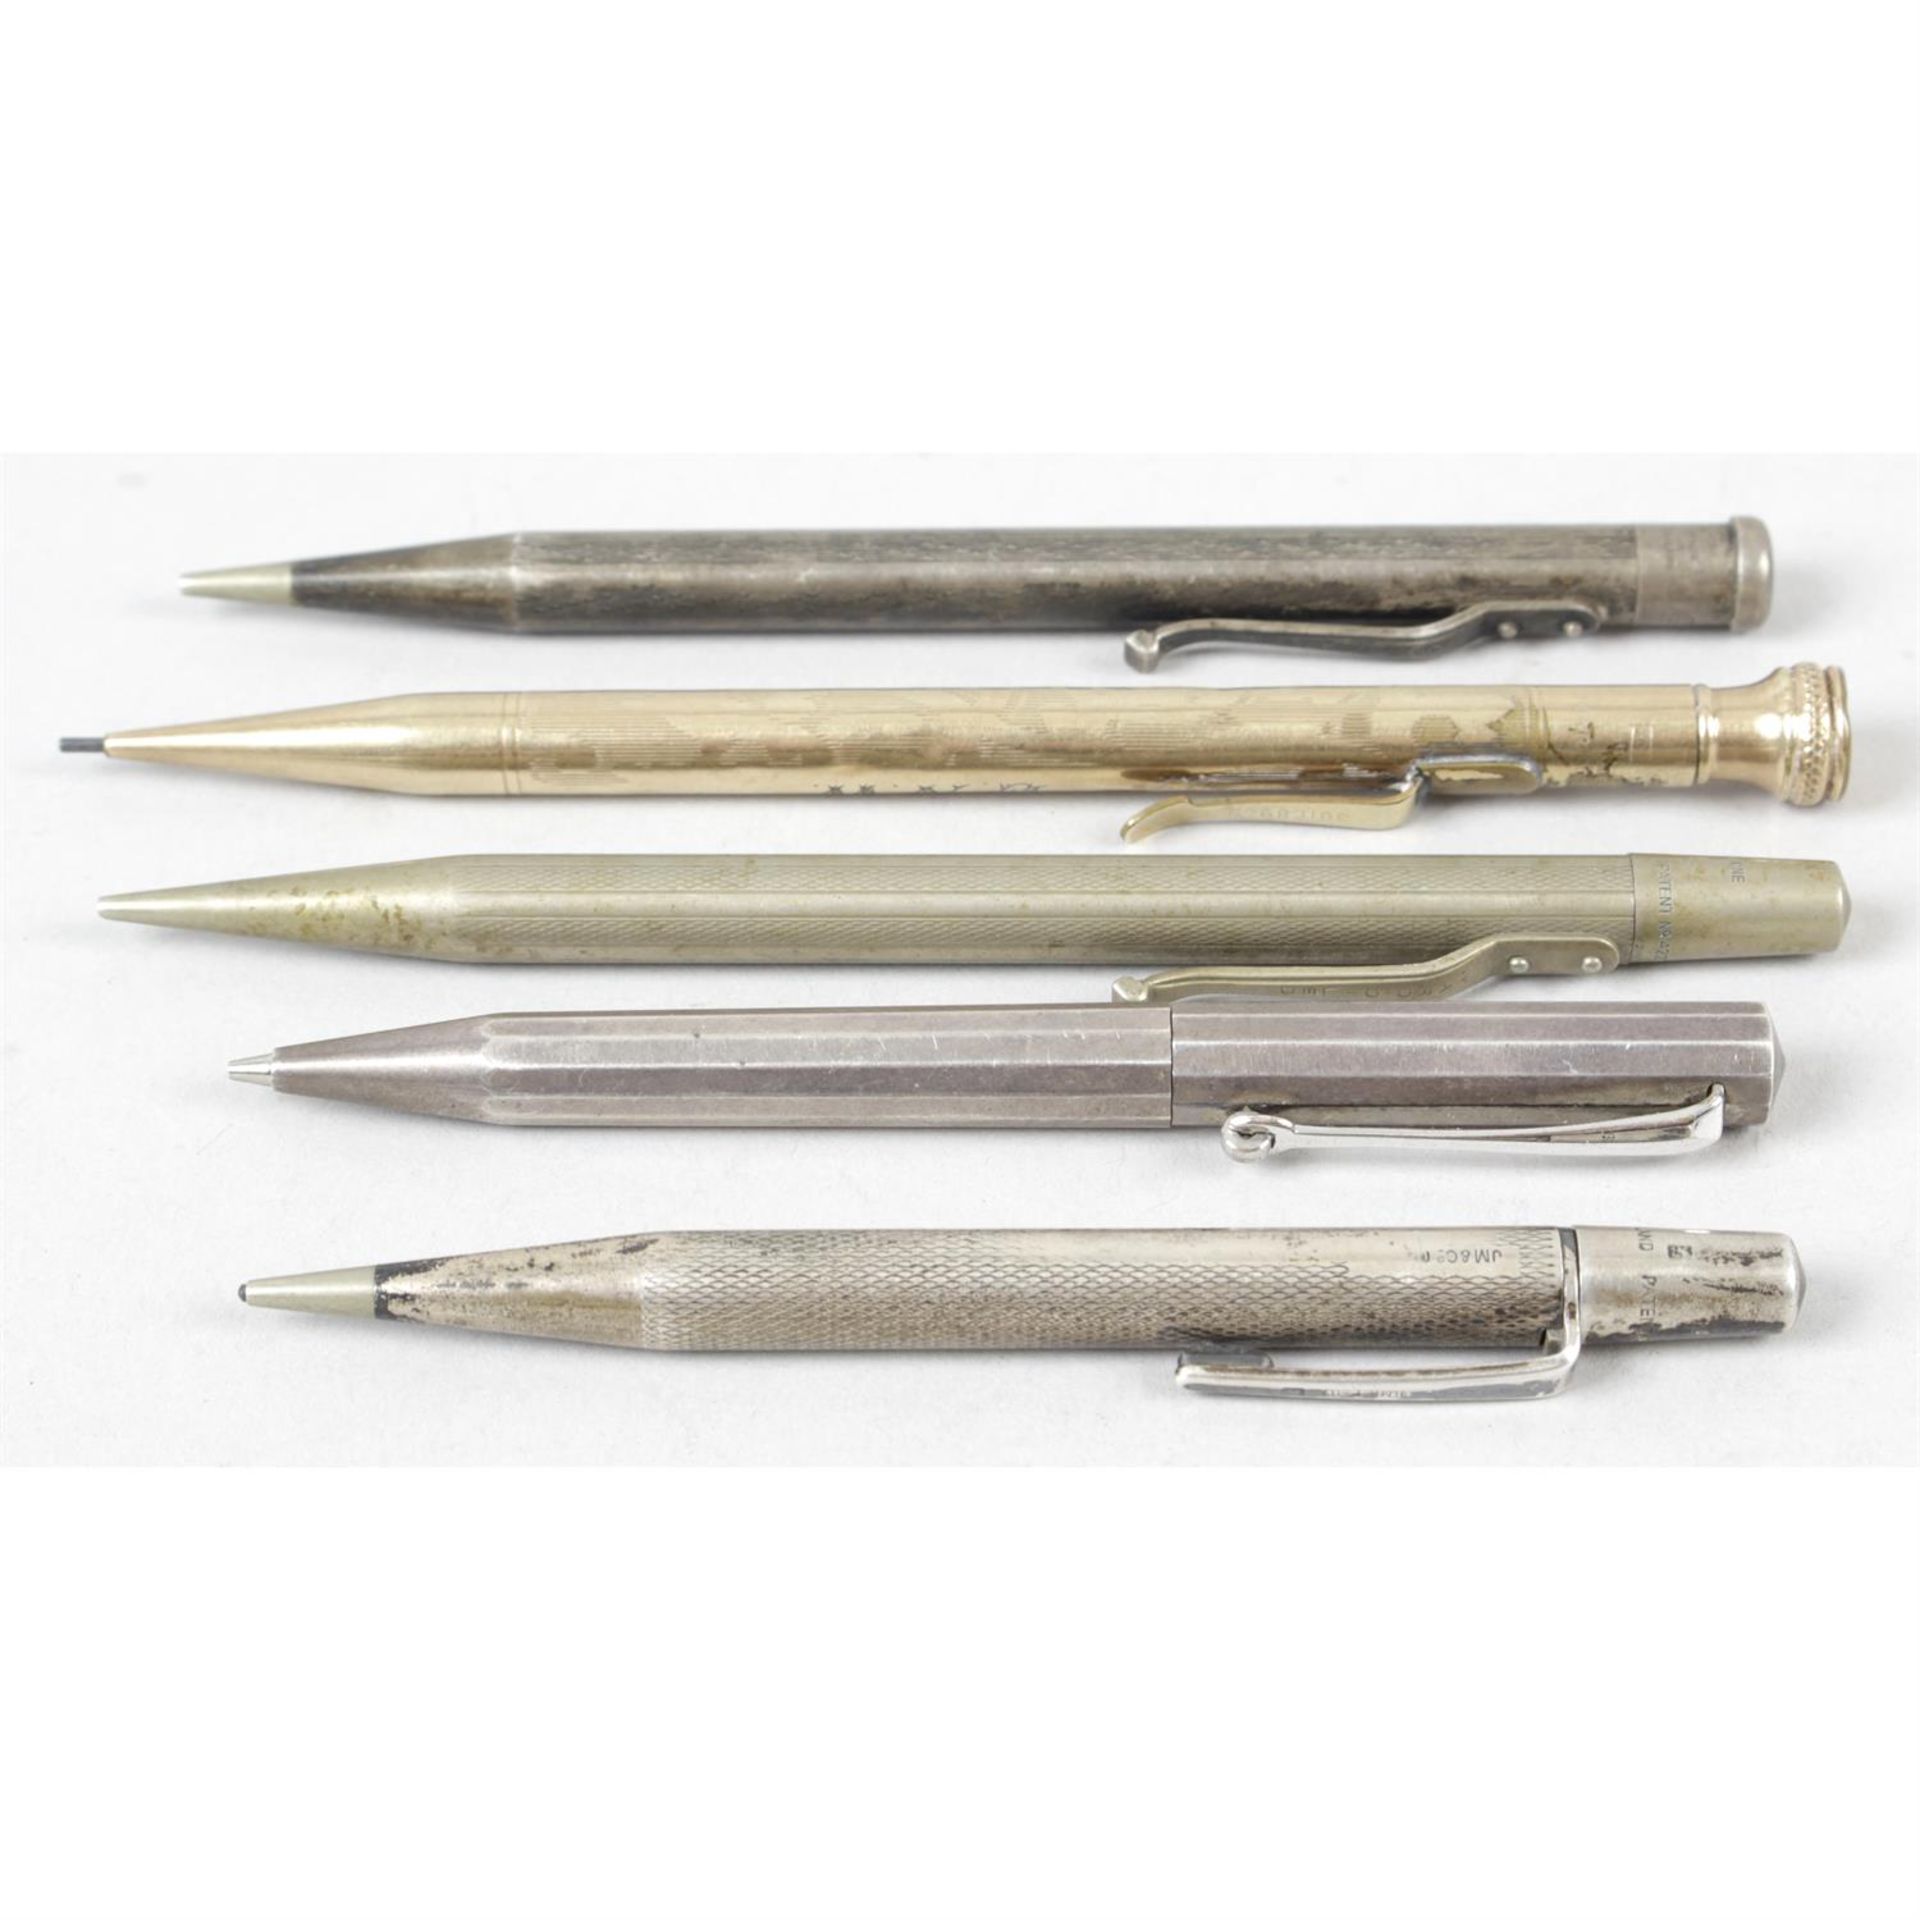 Two Yard-O-Led propelling pencils, together with three similar examples. (5)